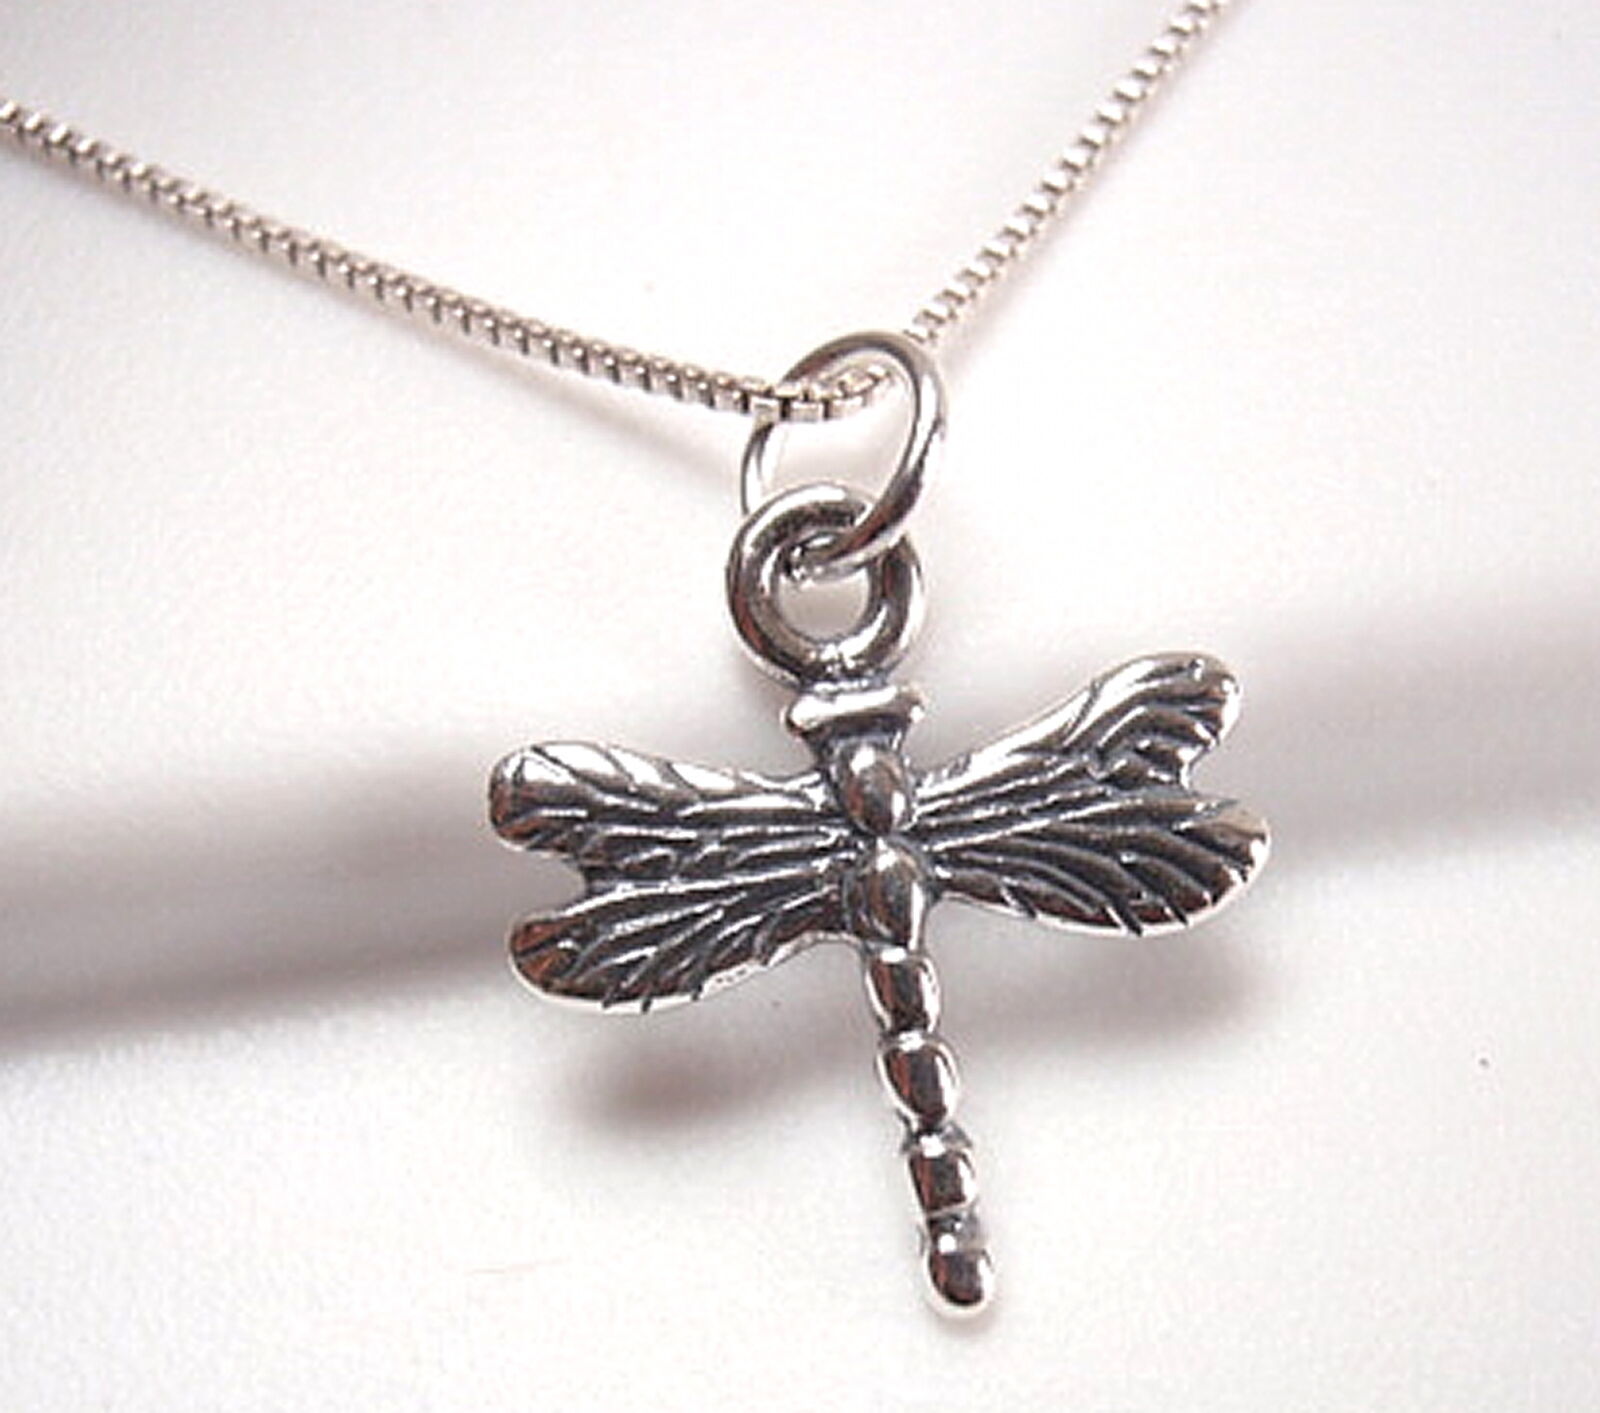 Very Small Dragonfly Necklace Sterling Silver Corona Sun Jewelry entomologist